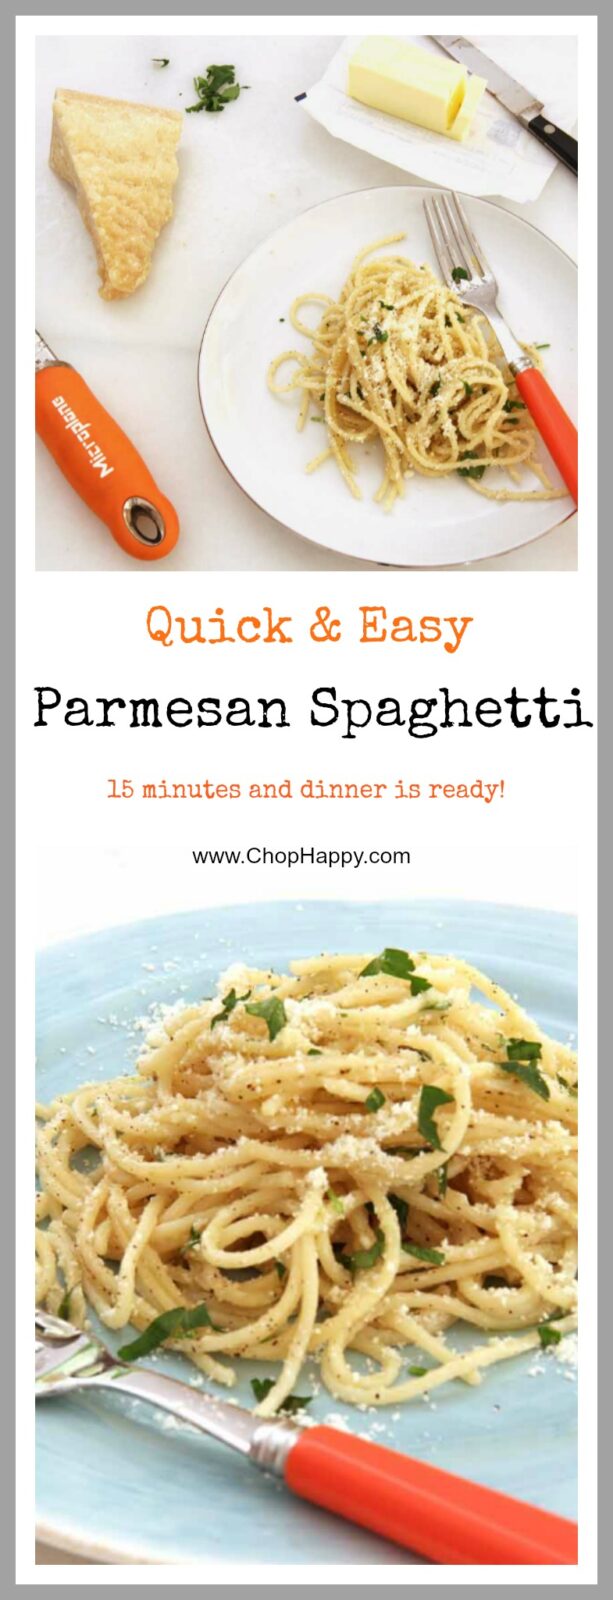 Parmesan Spaghetti Pasta Recipe - is super easy and quick way to get a cheesy dinner on the table on the busy weeknights. Grab pasta, cheese, and in 15 minutes dinner is ready. www.ChopHappy.com